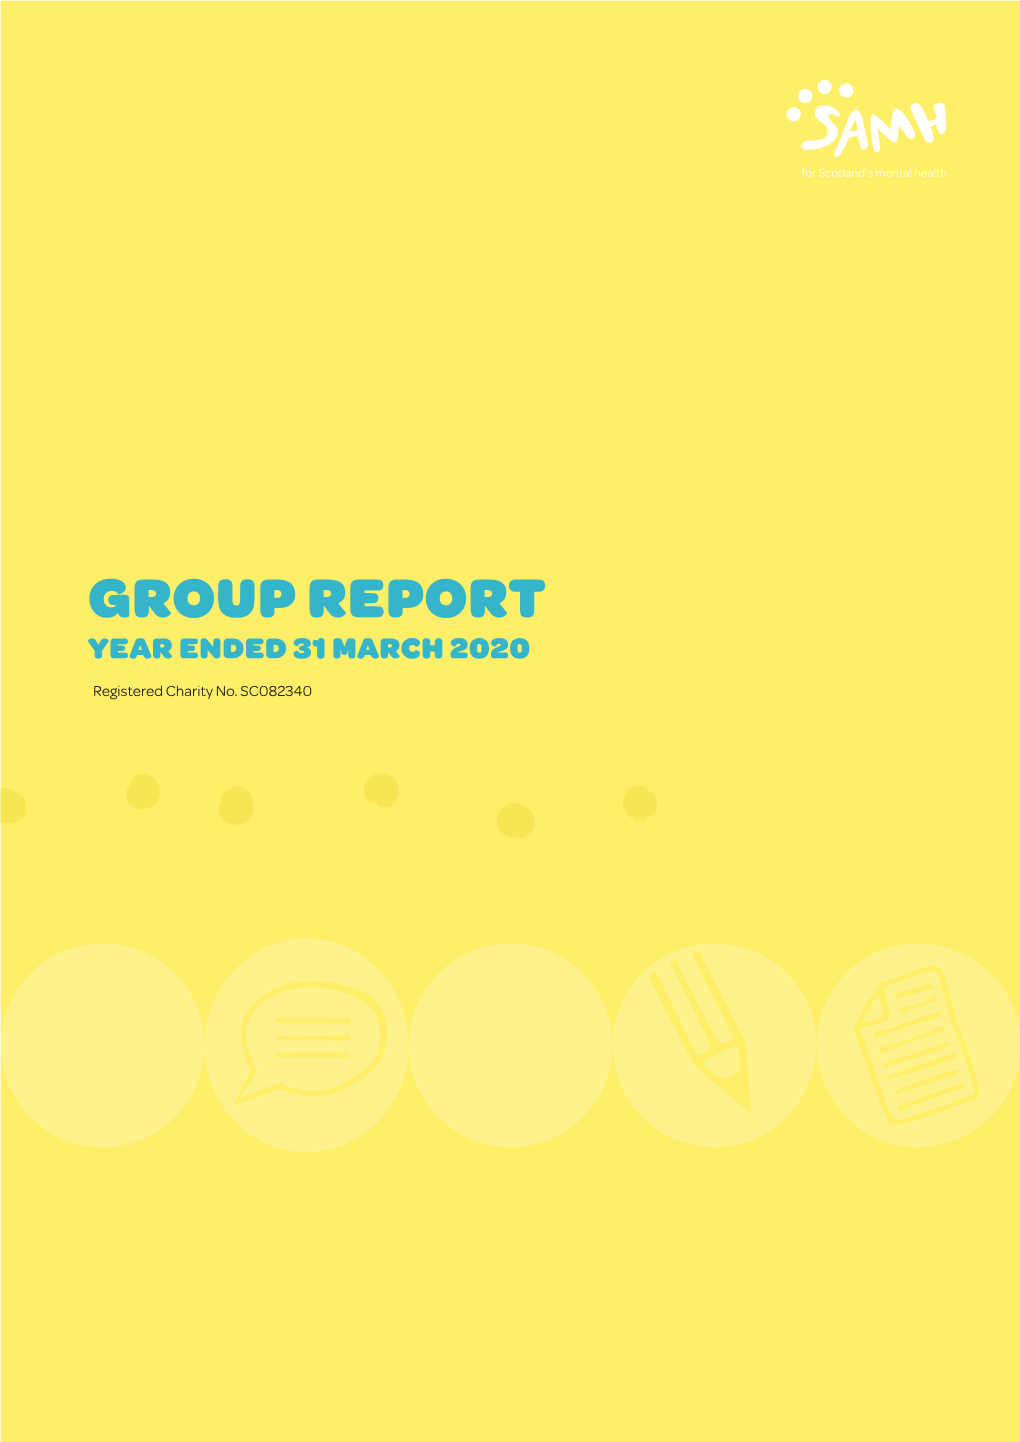 Group Report Year Ended 31 March 2020